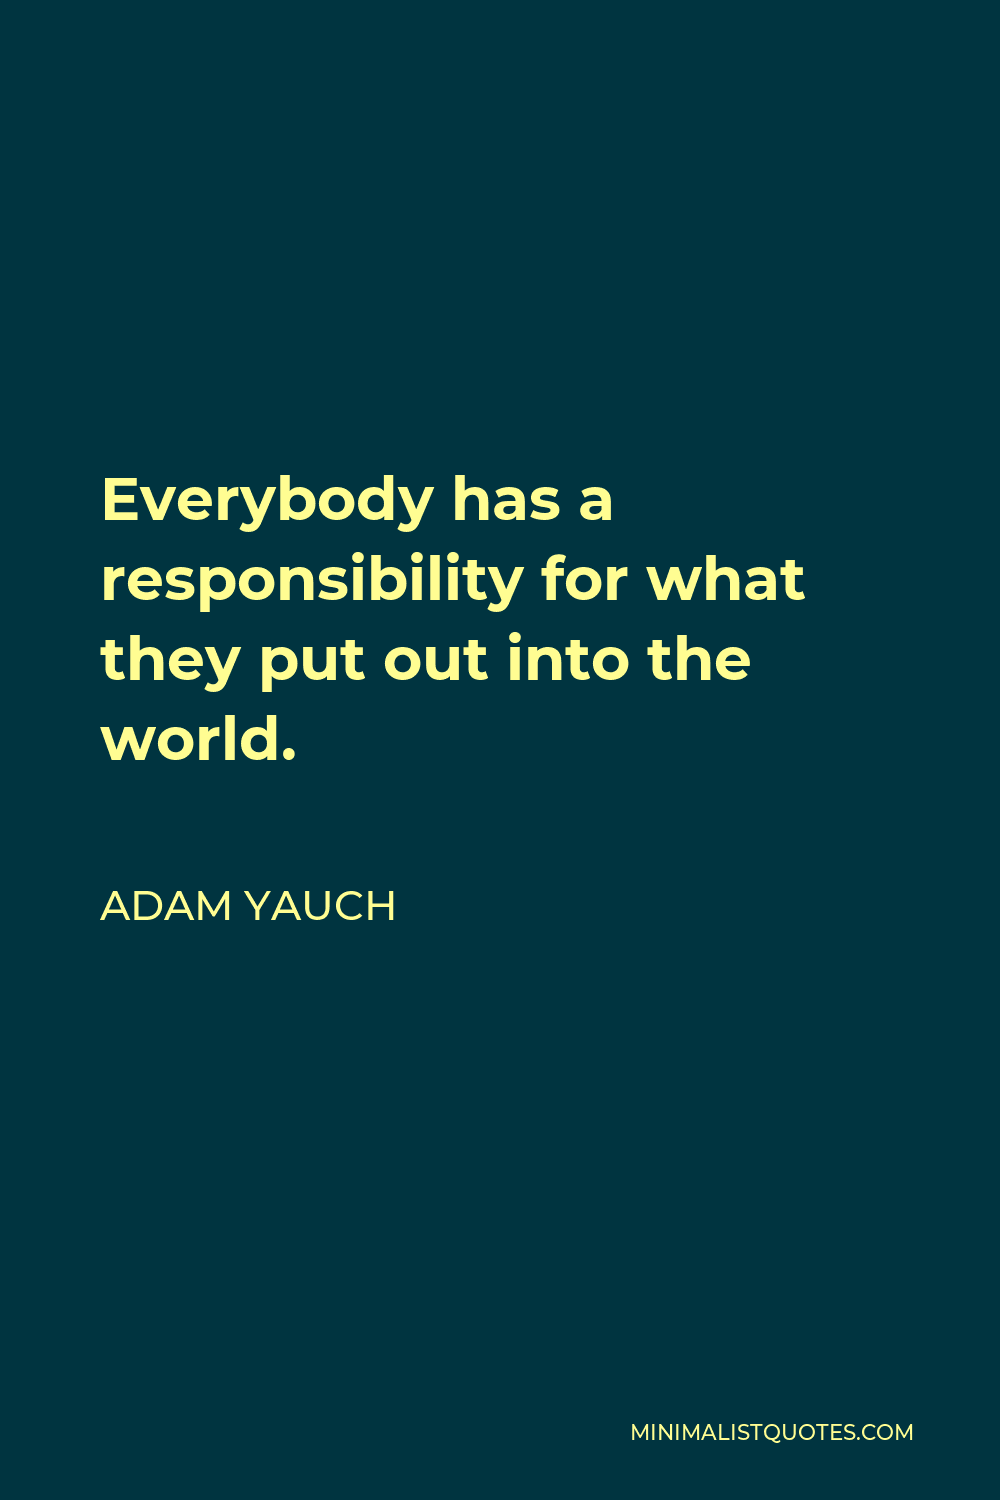 Adam Yauch Quote - Everybody has a responsibility for what they put out into the world.